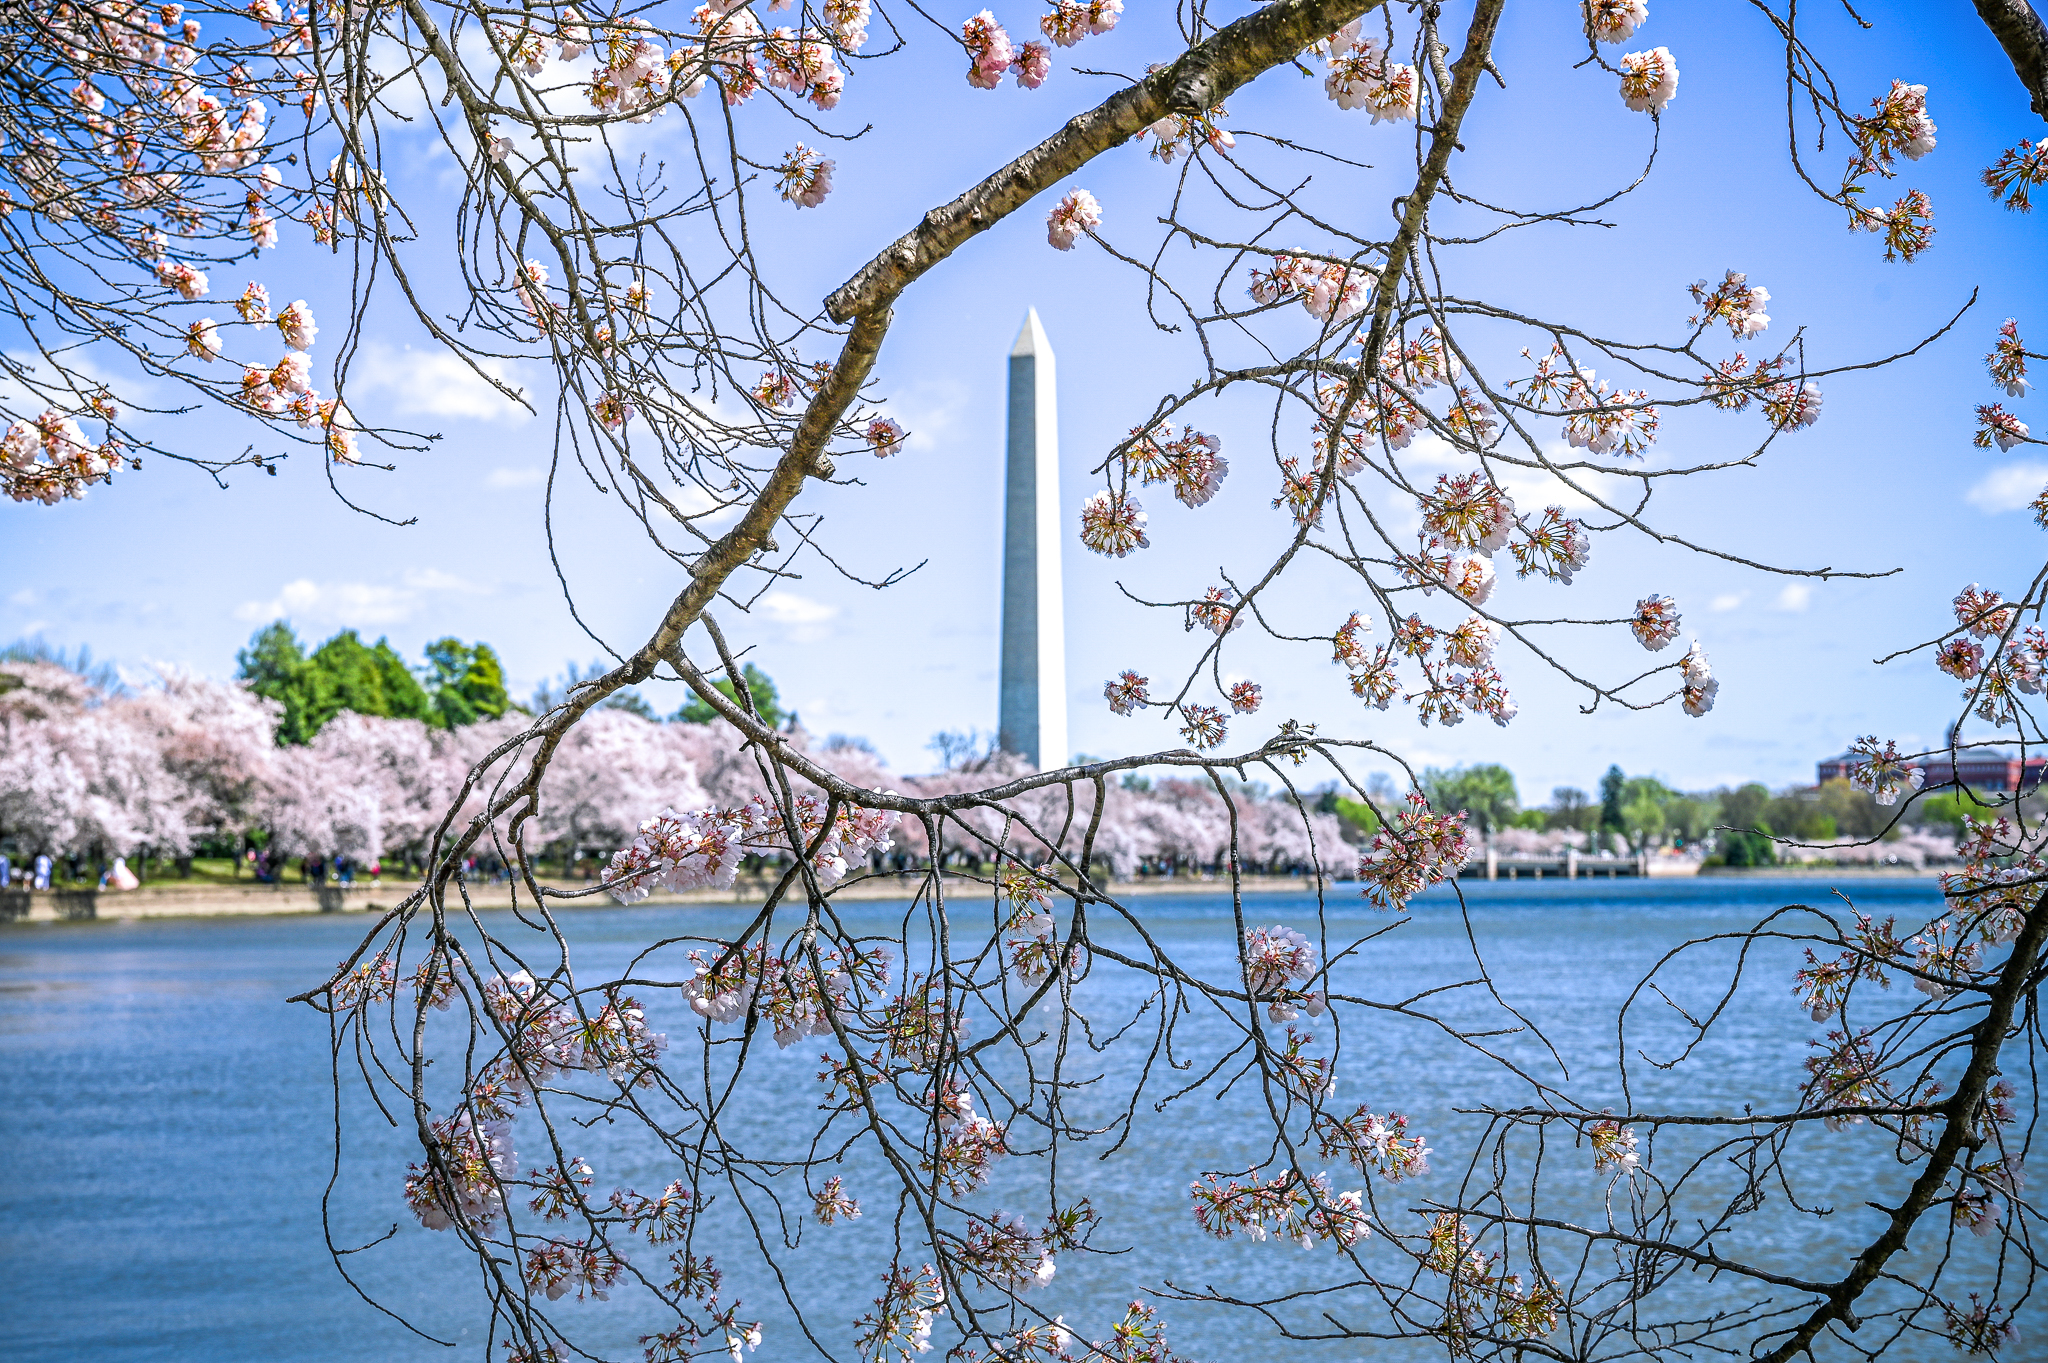 Washington Monument and cherry blossoms